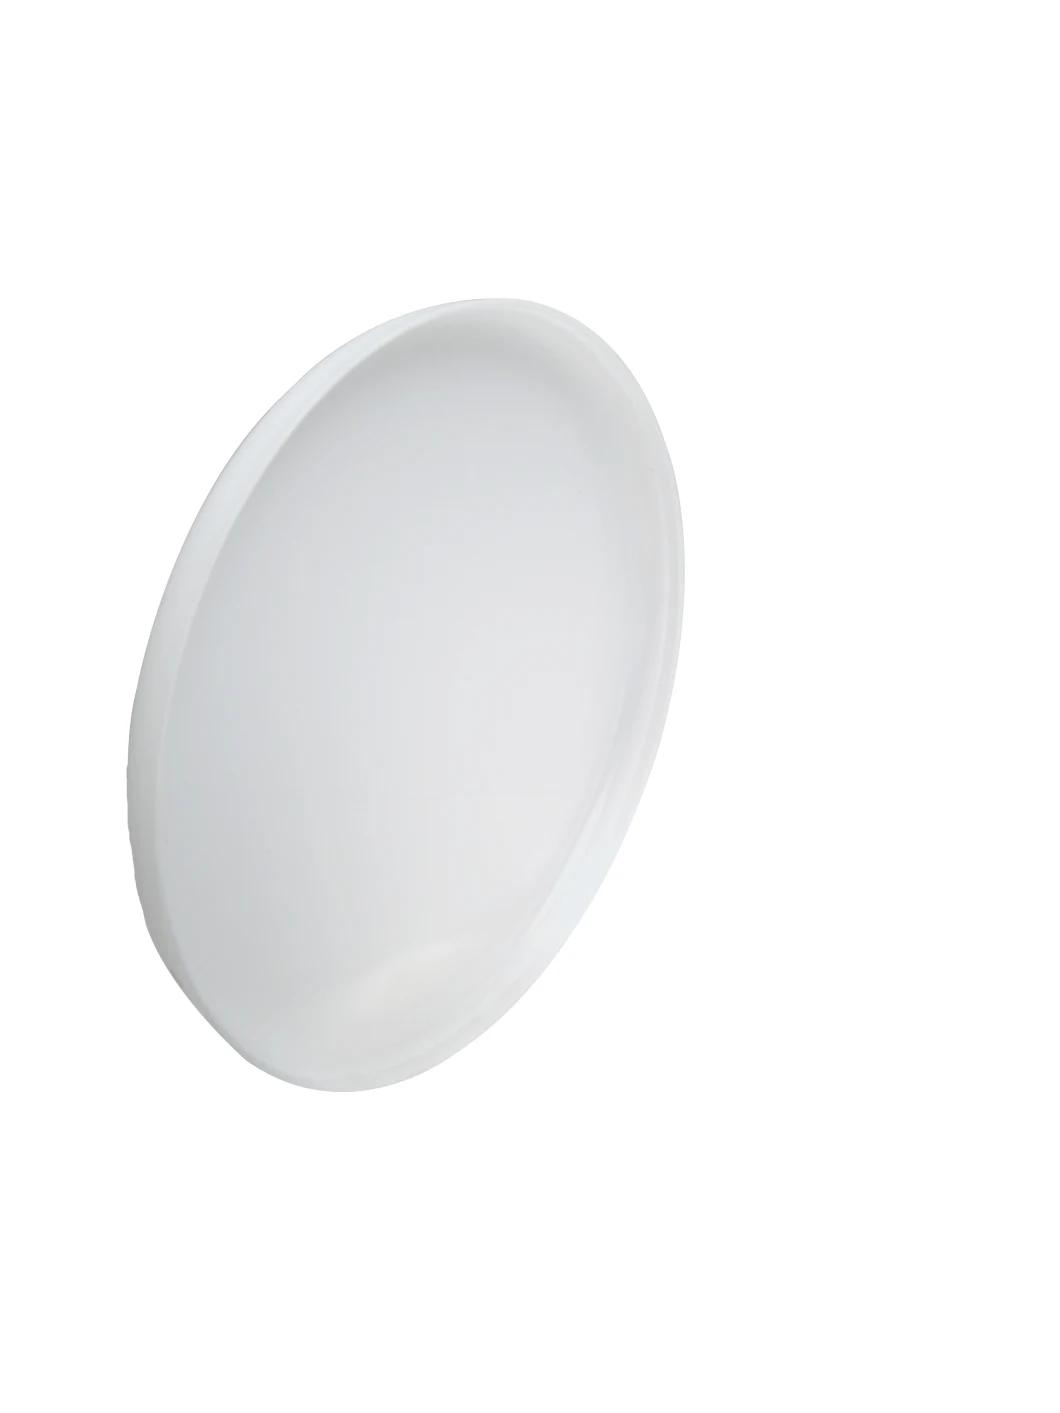 Factory Price EMC LVD RoHS Certification Square Round Office LED Panellight Surface Mount 6109W 15W 22W LED Panel Light